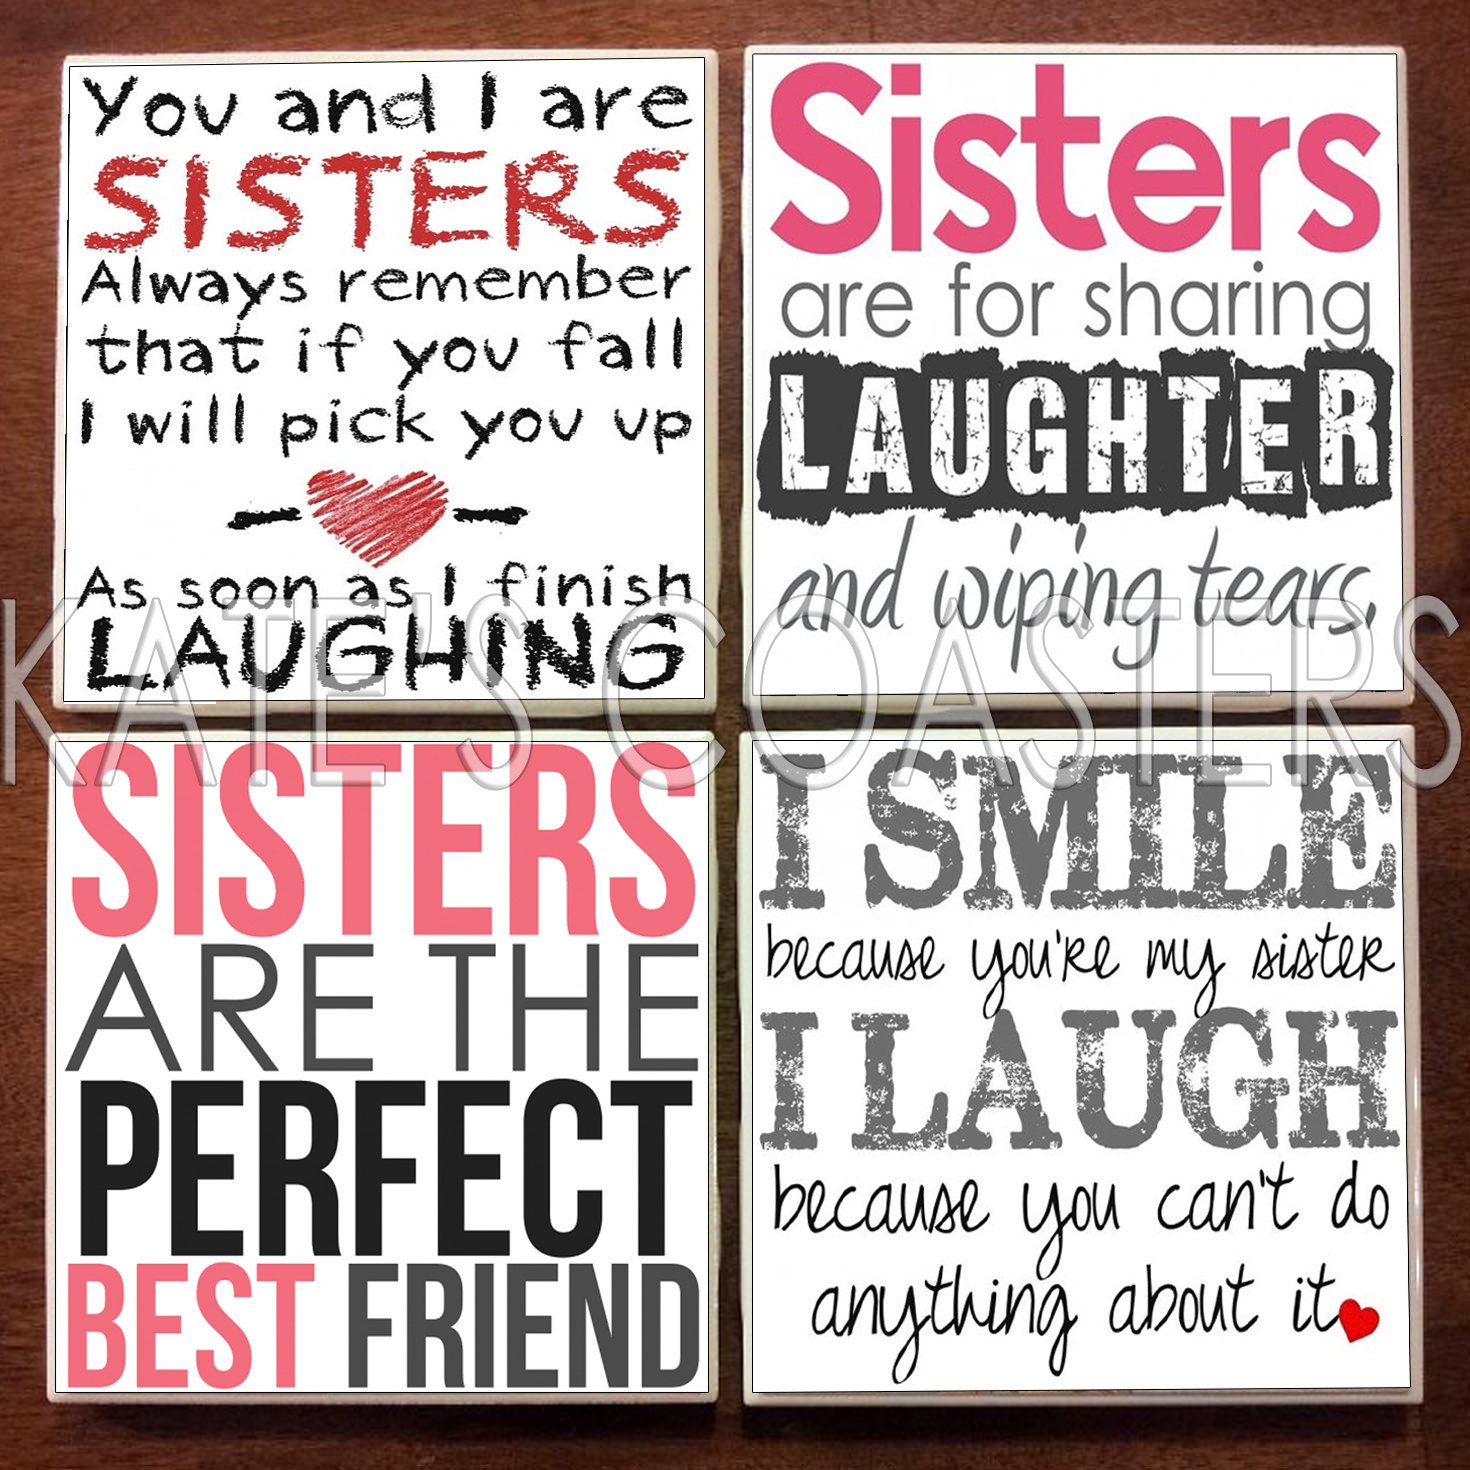 valentine quotes for sister